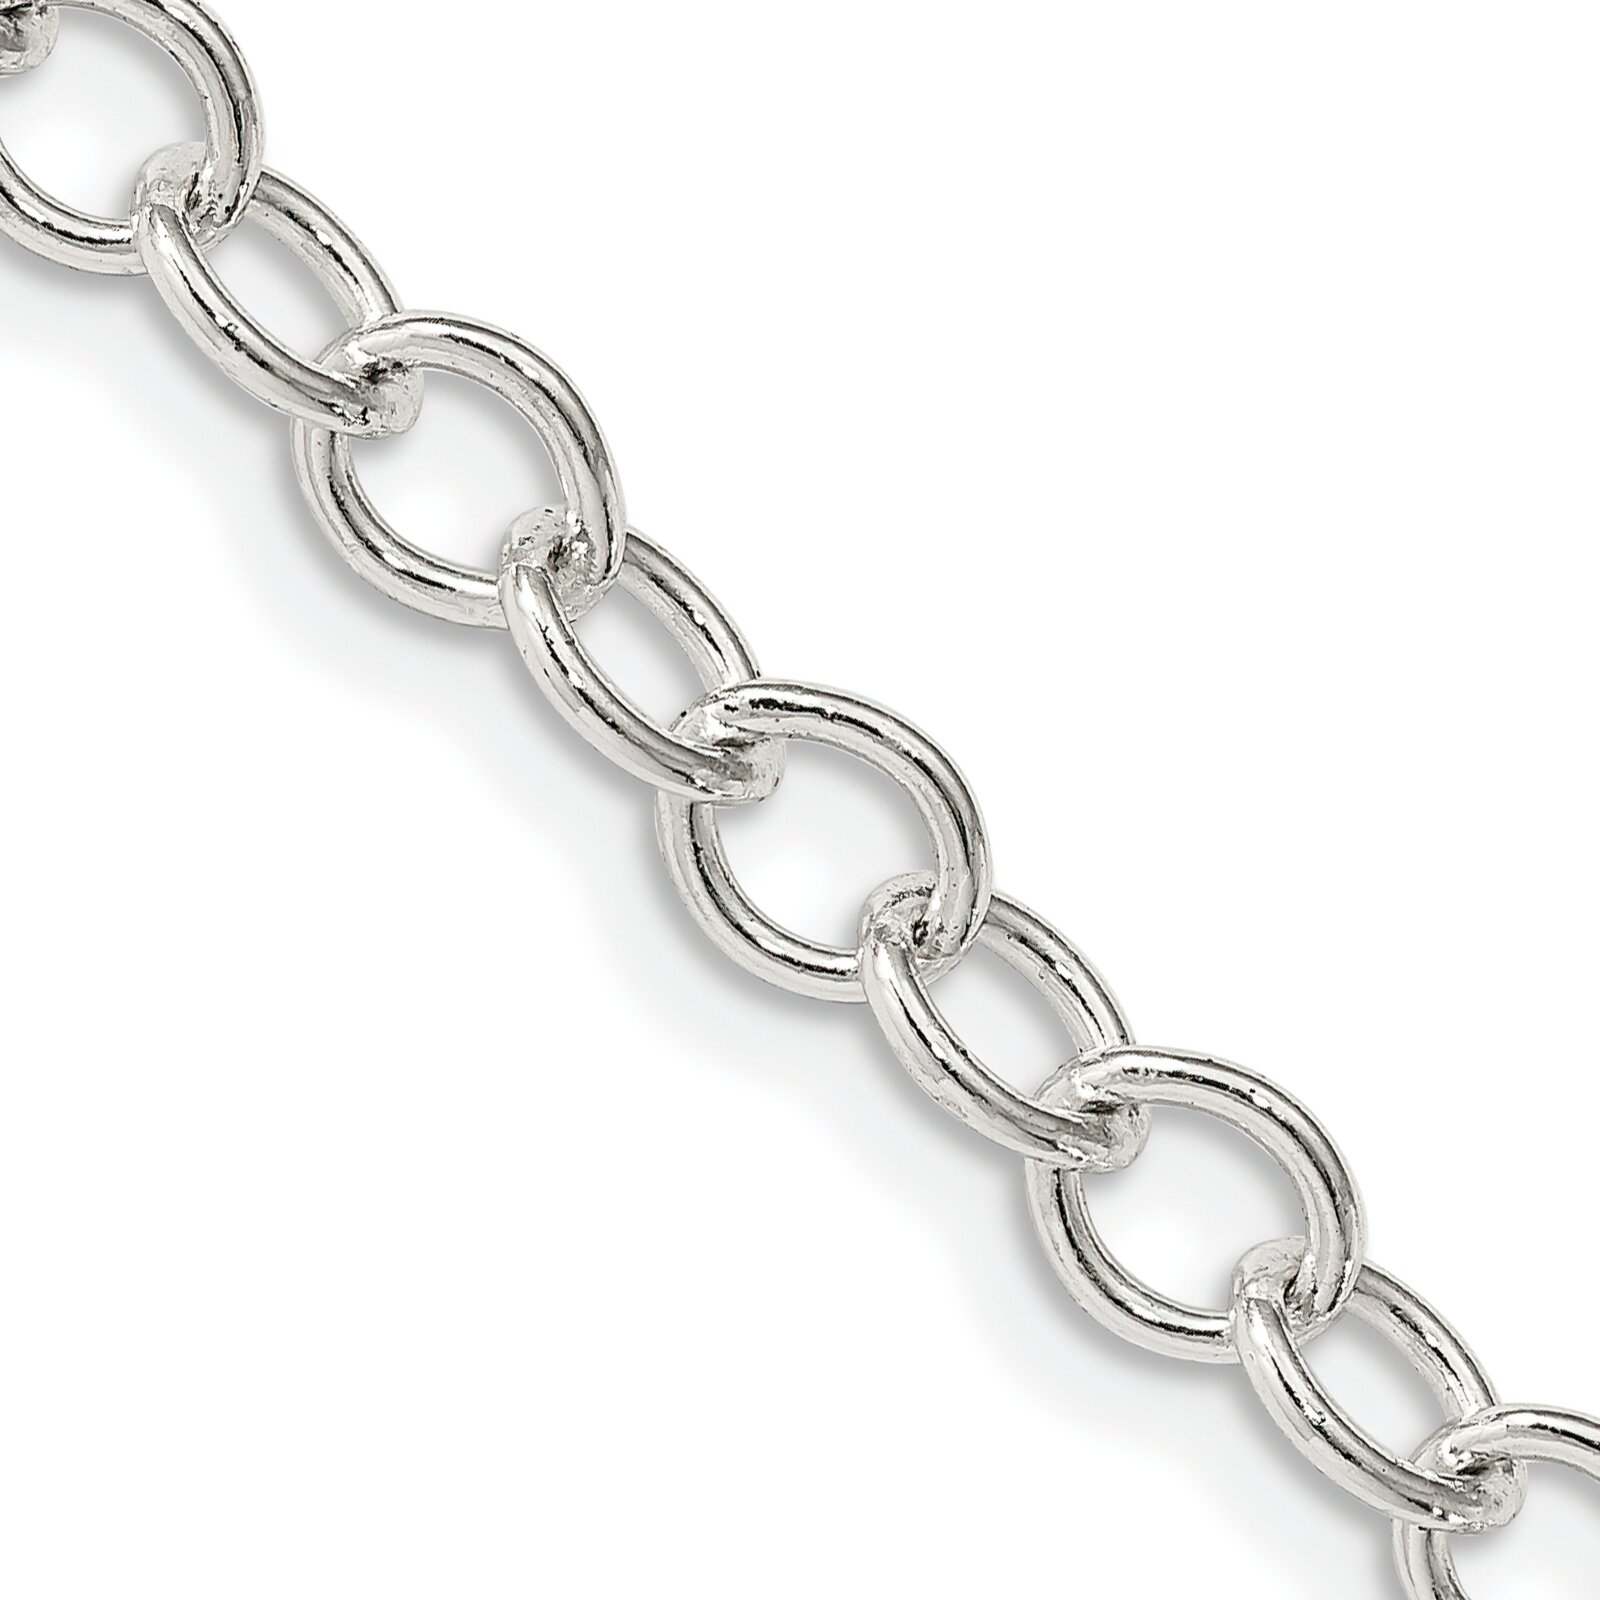 Findingking Sterling Silver Chain 20"